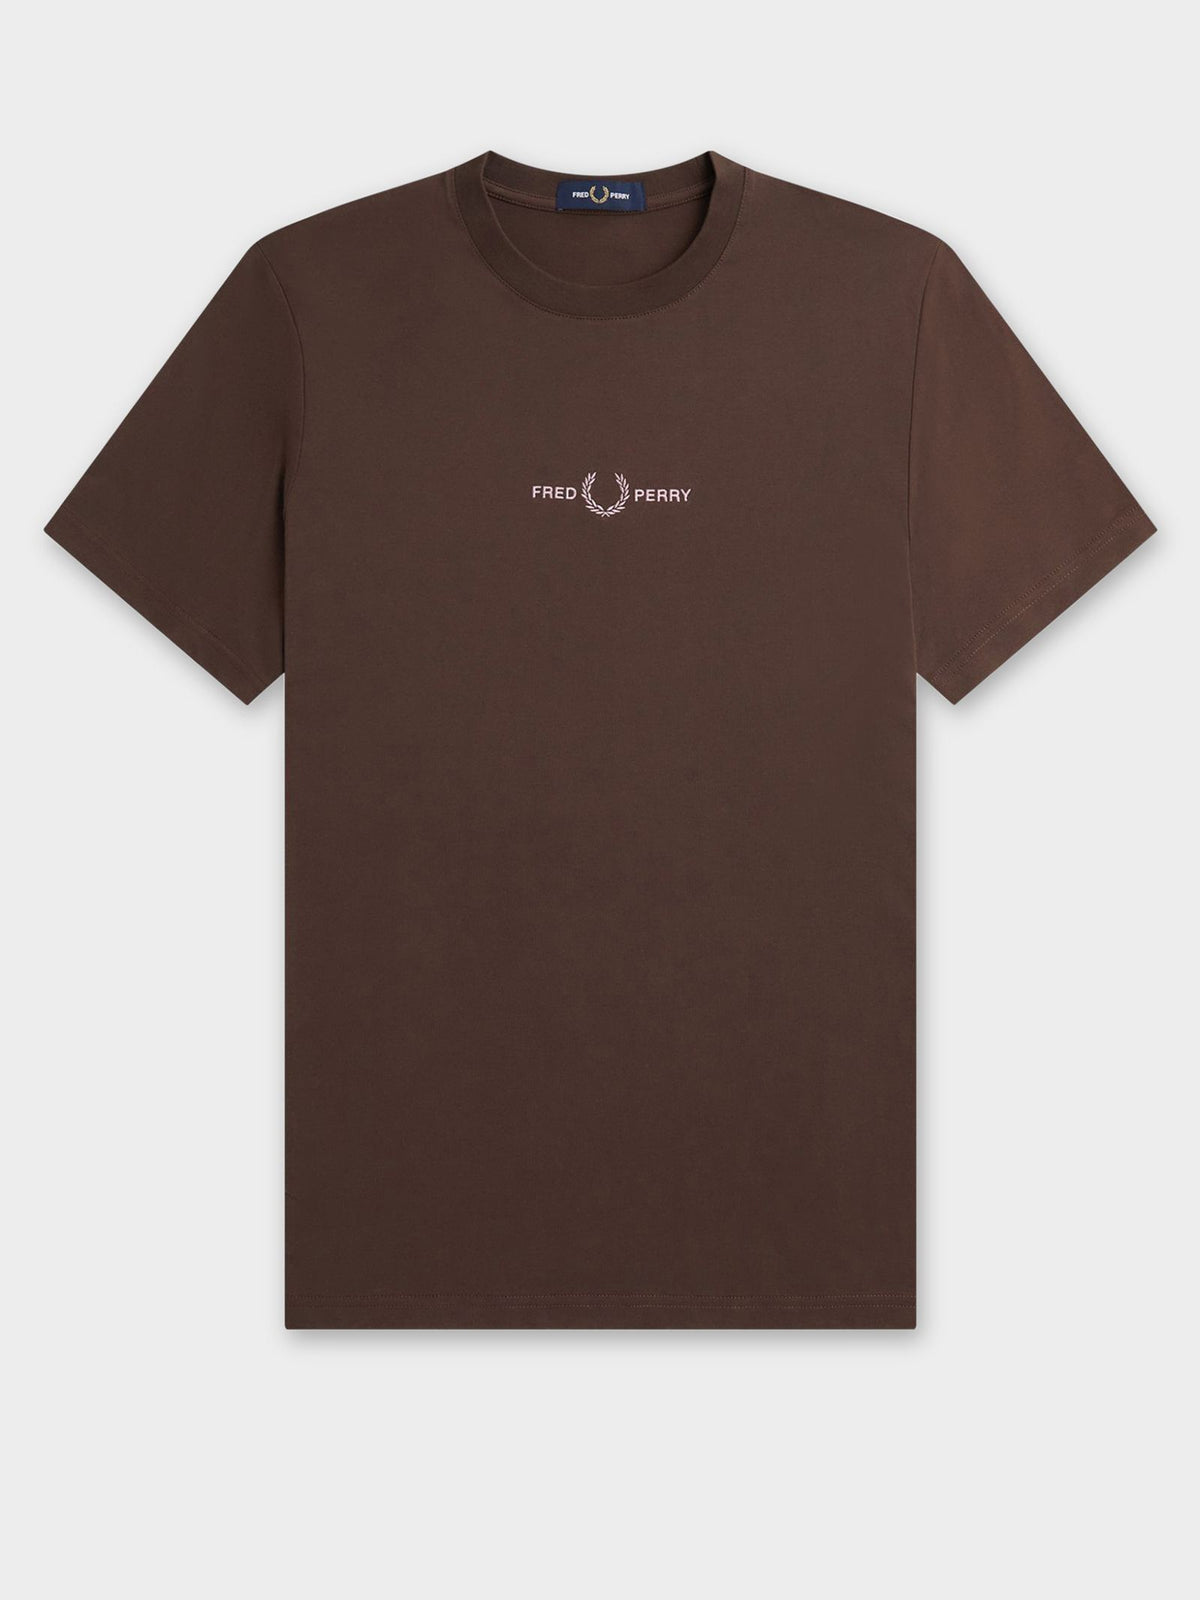 Embroidered T-Shirt in Burnt Tobacco